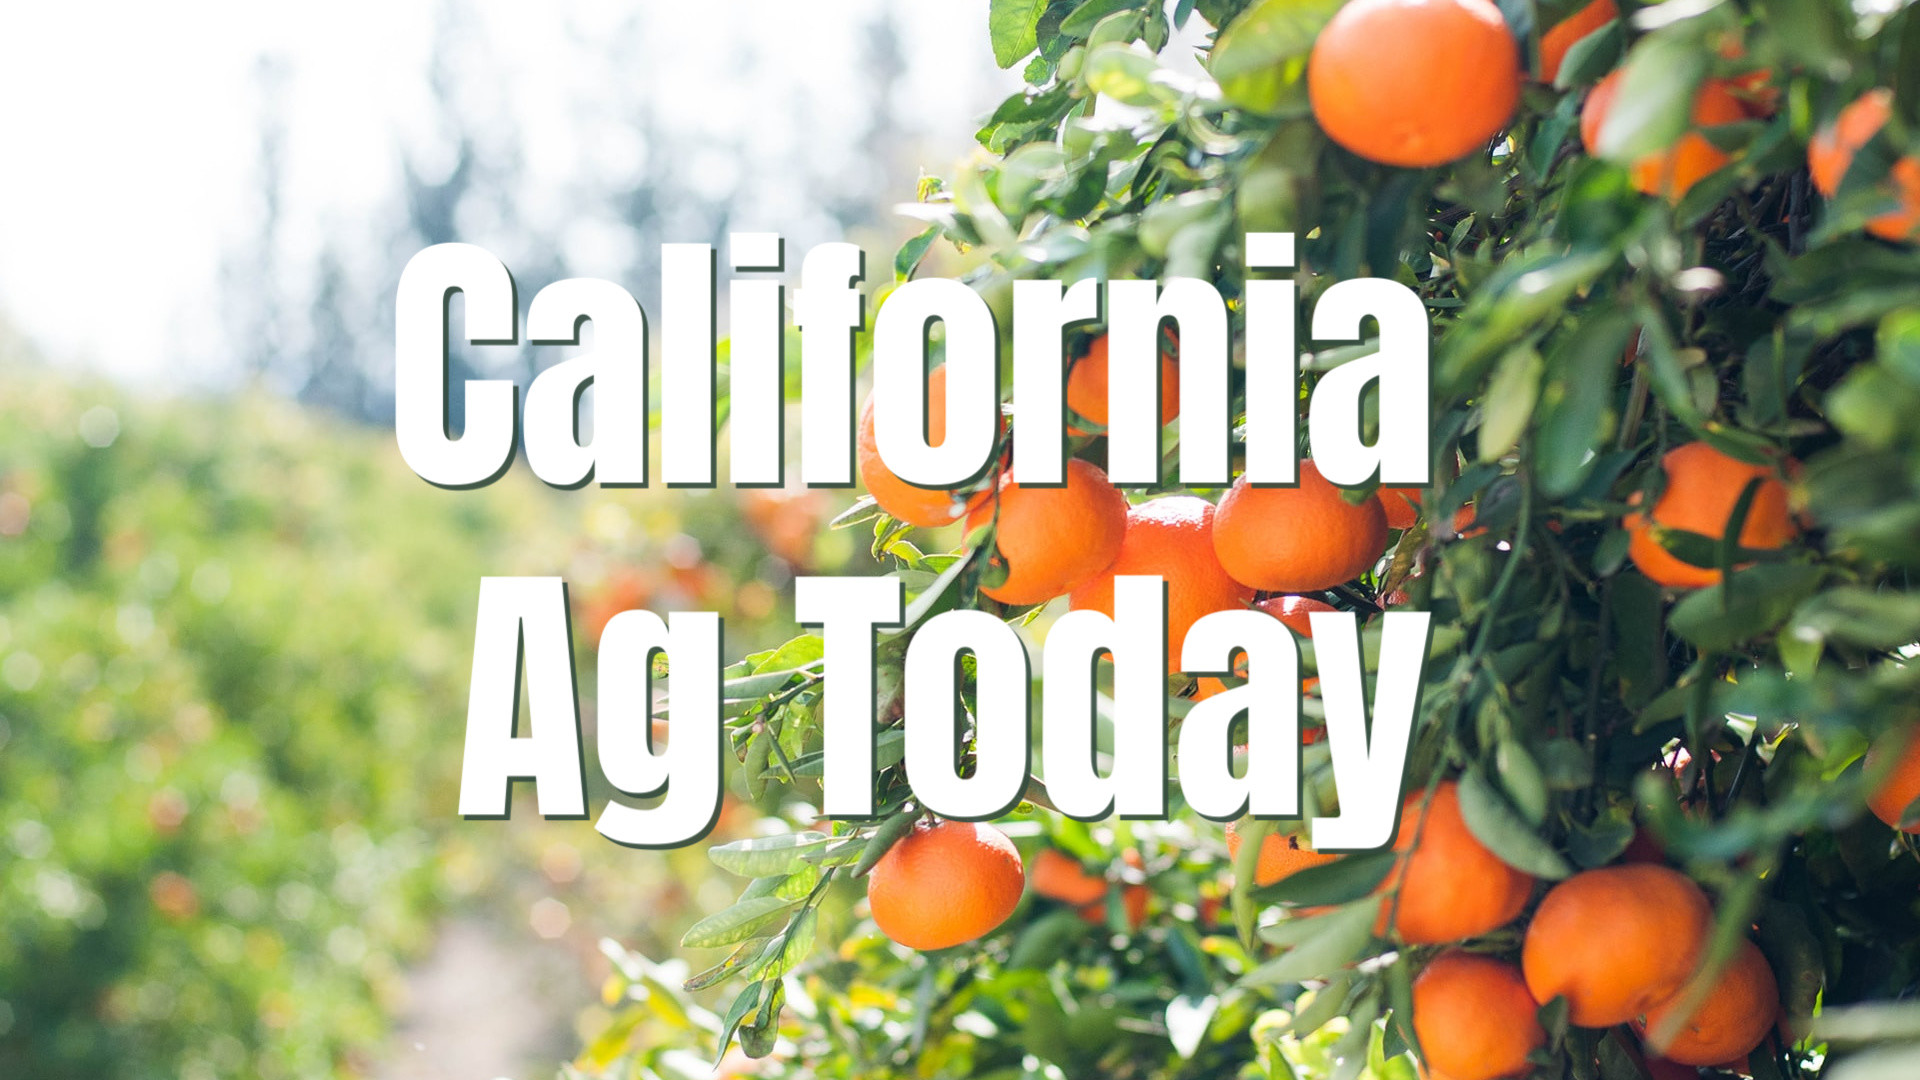 FMC Friday Systemic Fungicide Gaining Interest in California